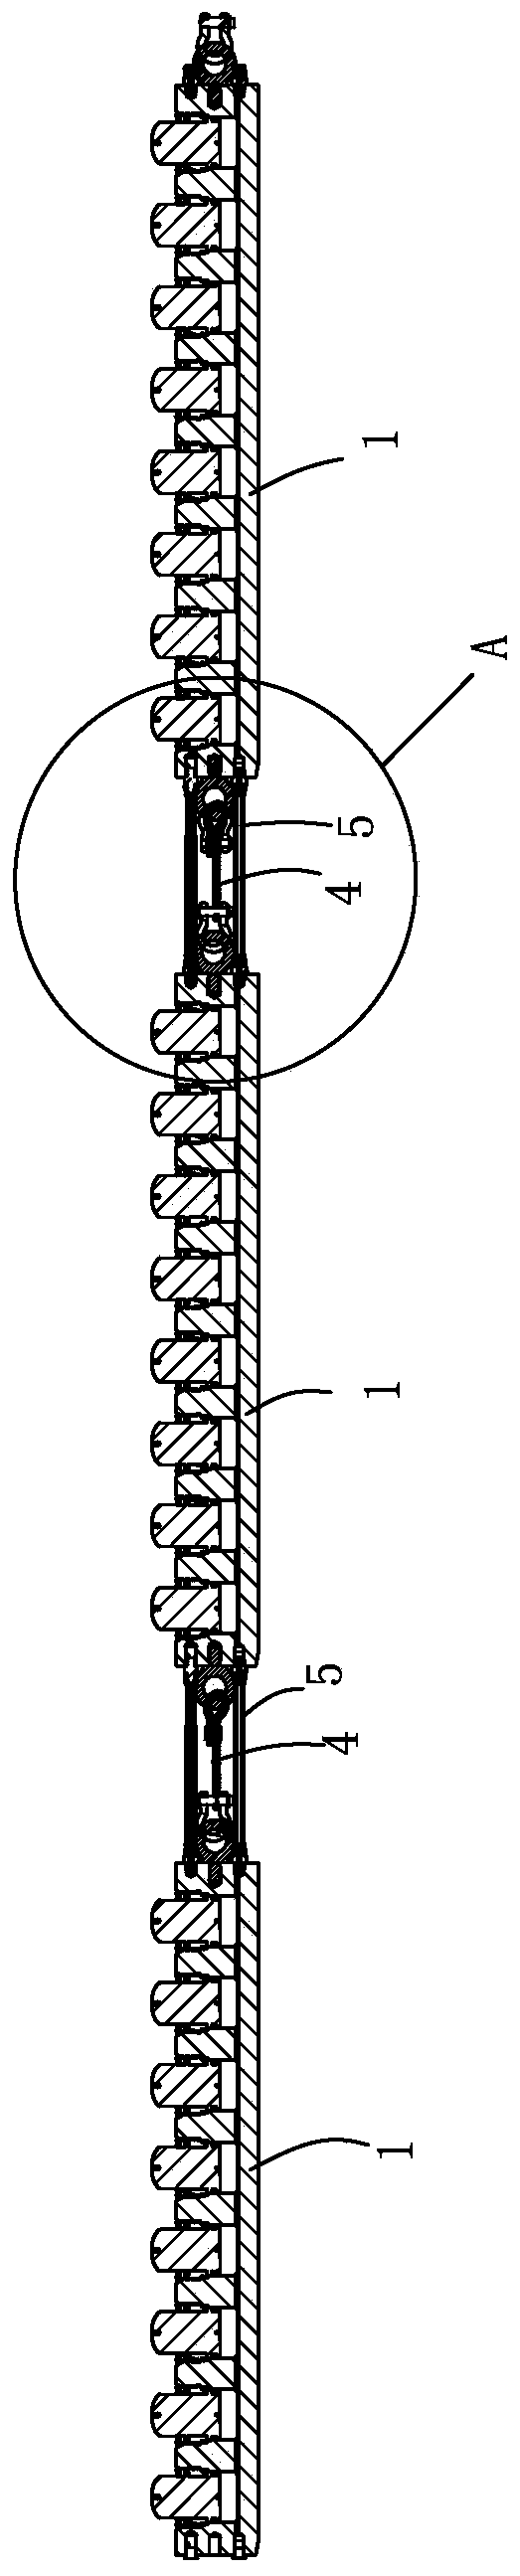 Splitting rod with series connection structure